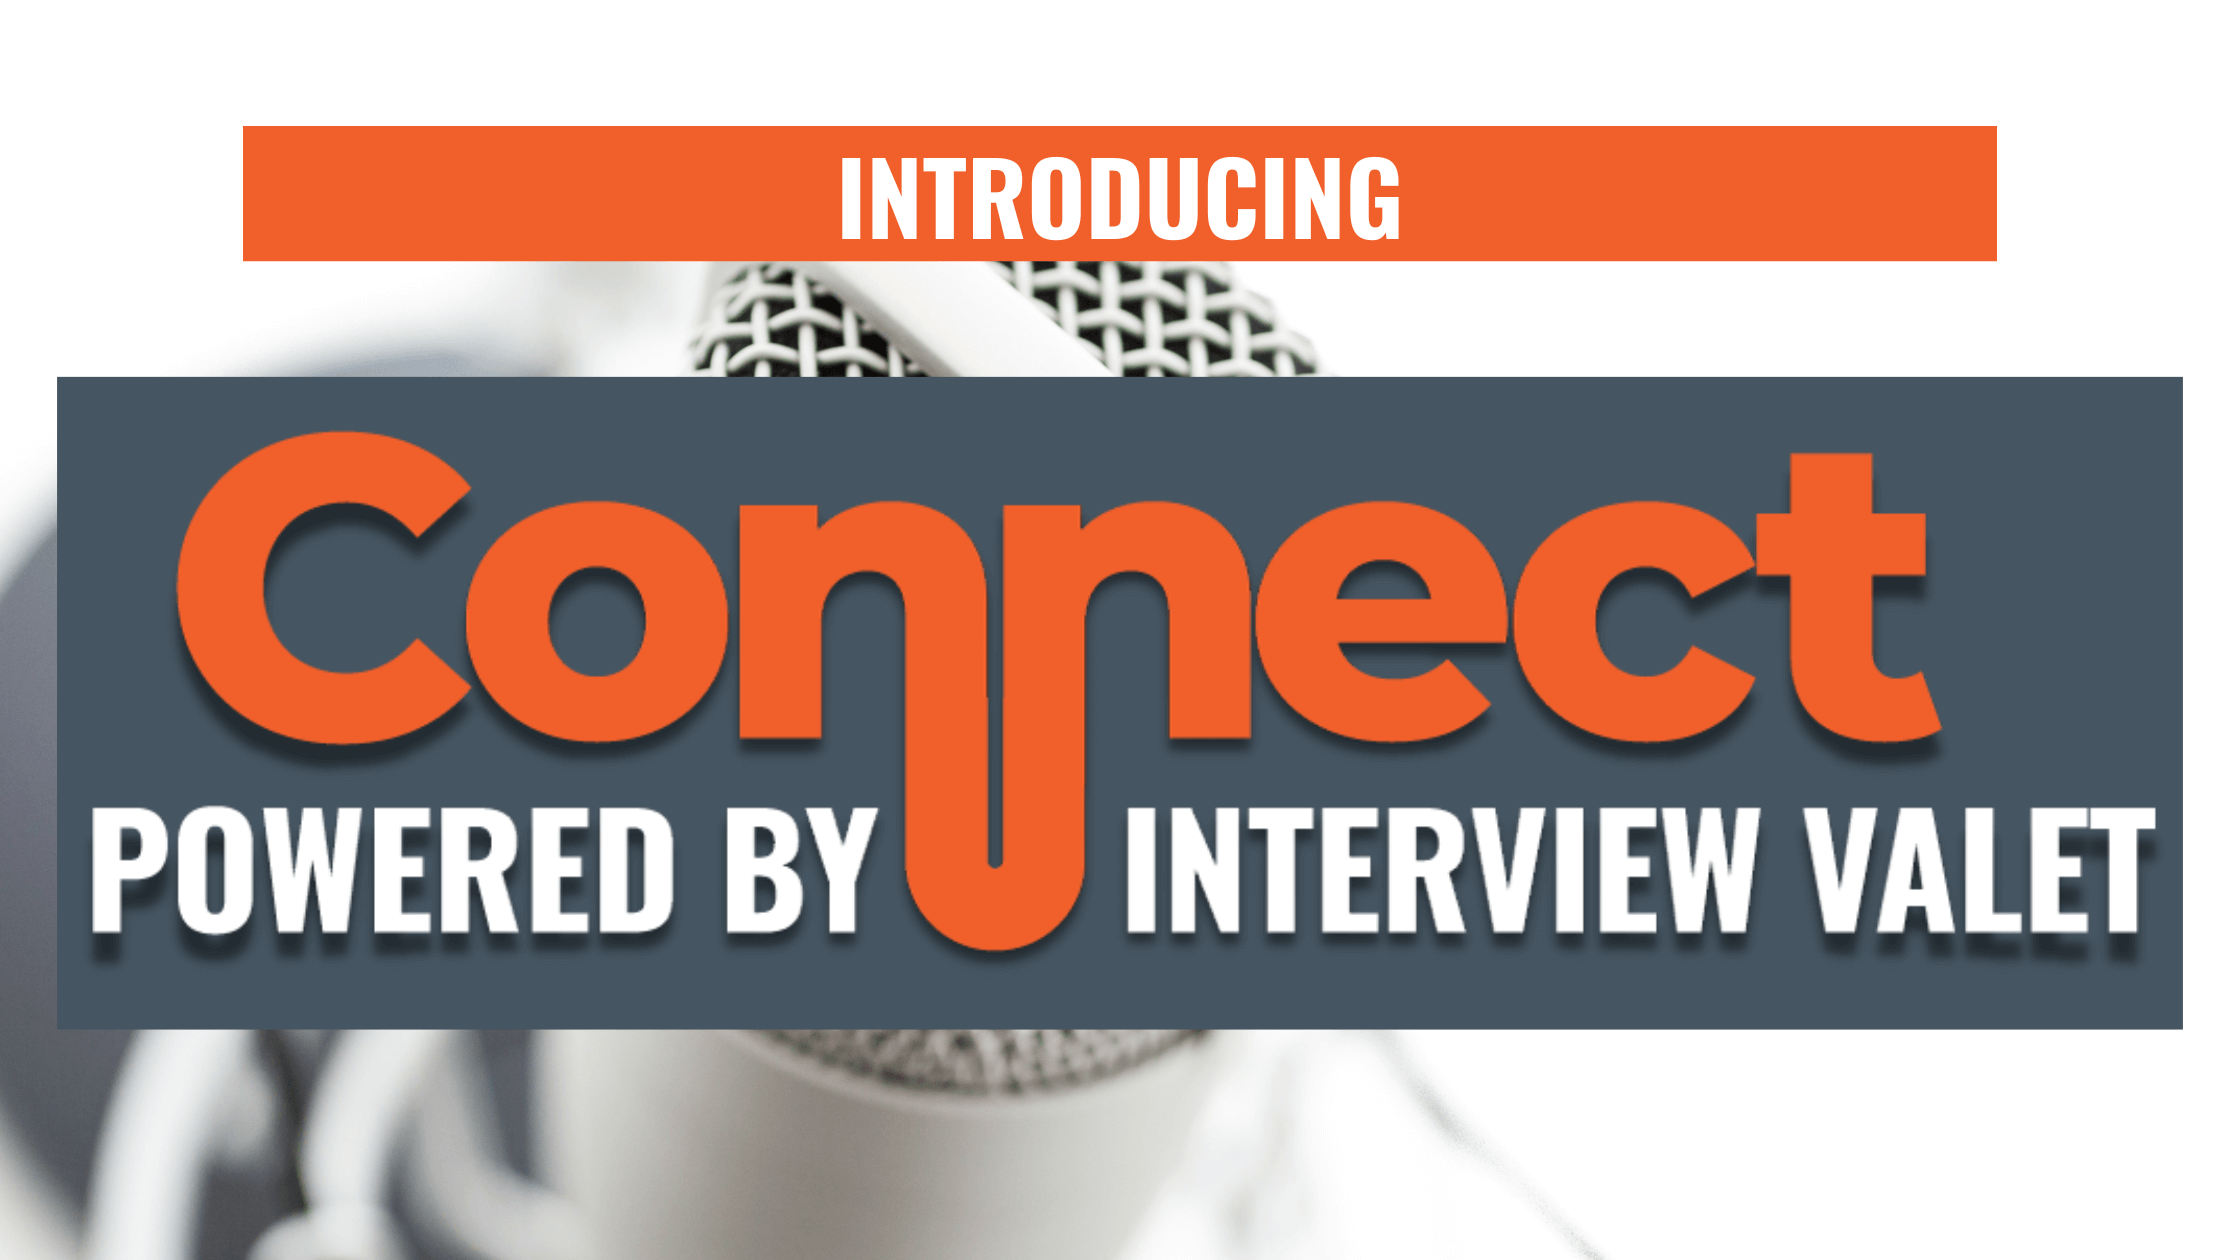 Interview Valet assumes Connect